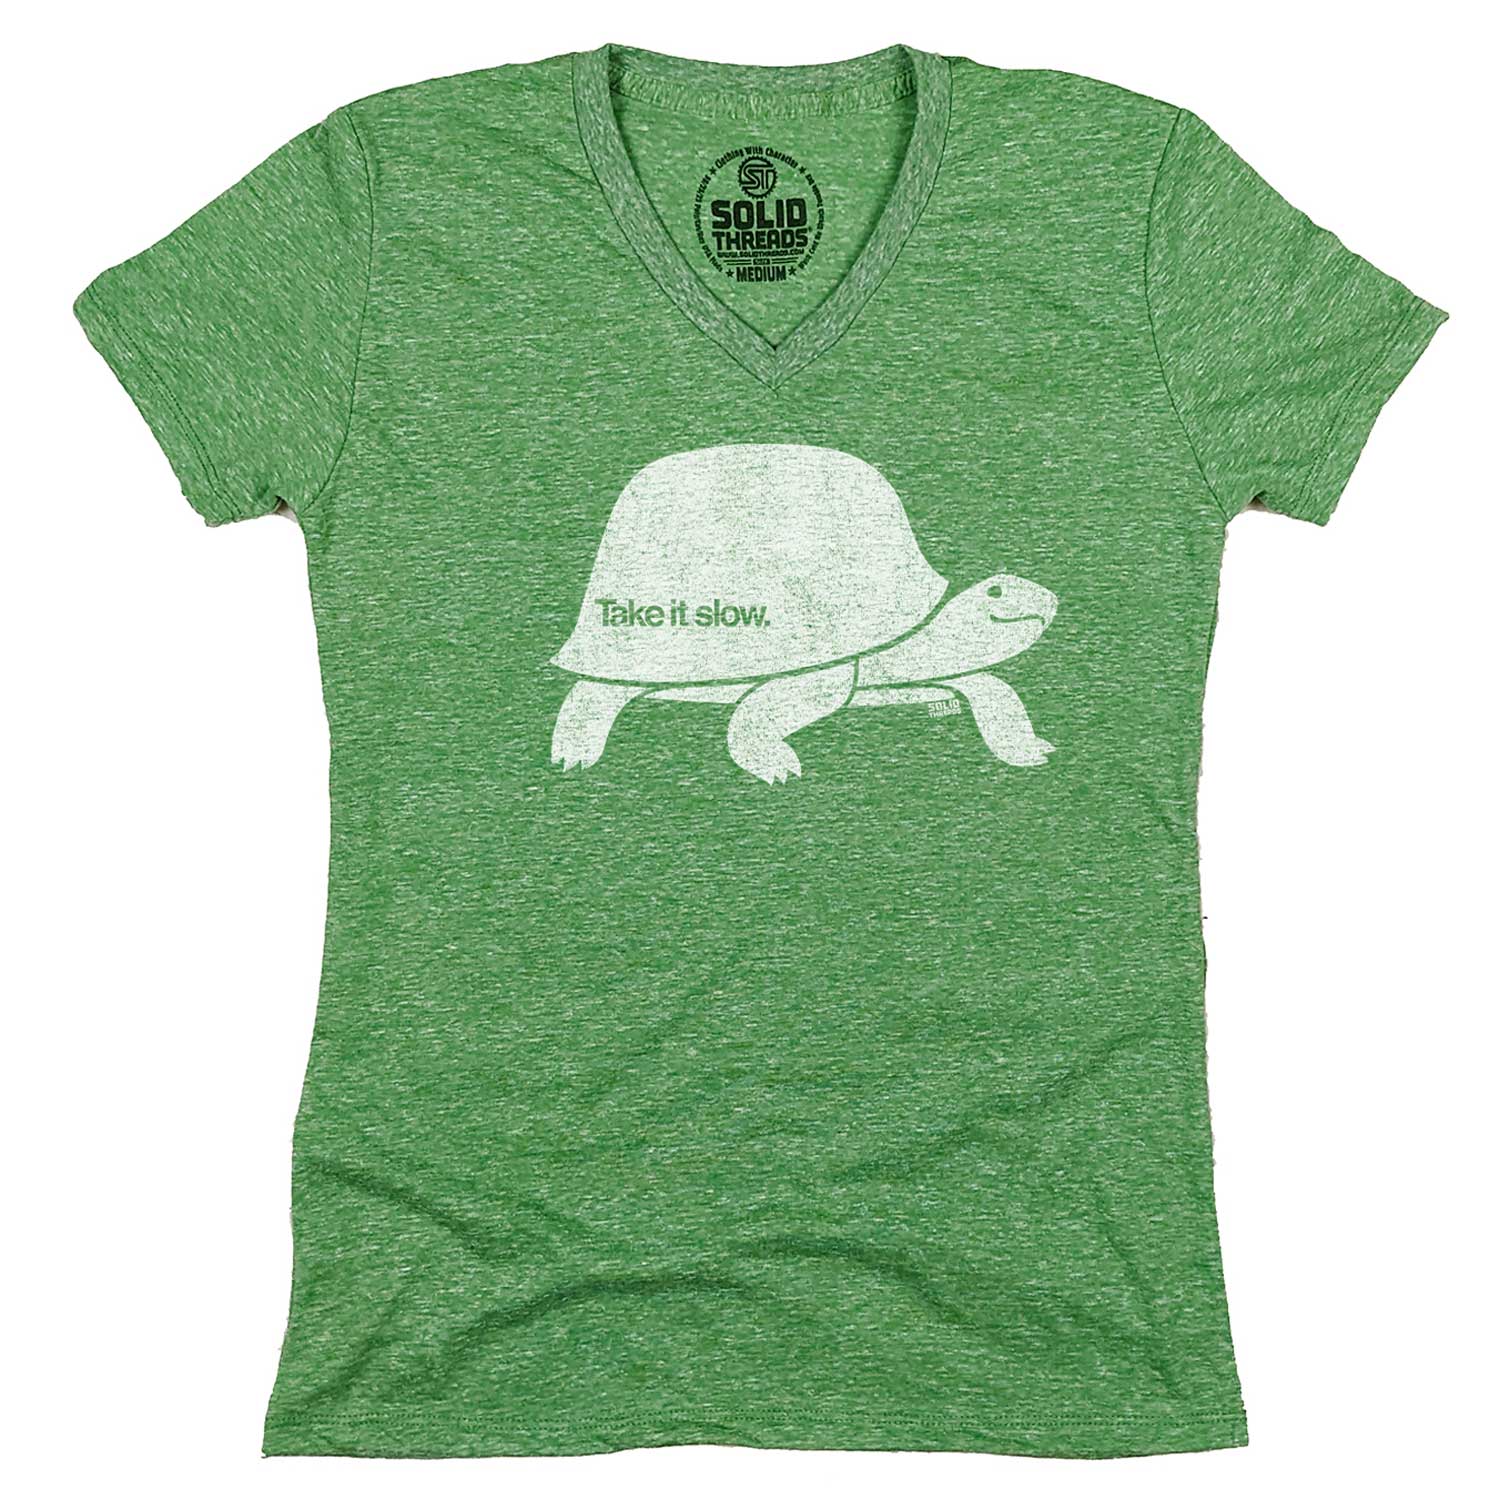 Women's Take it Slow Vintage Graphic V-Neck Tee | Funny Turtle T-shirt | Solid Threads